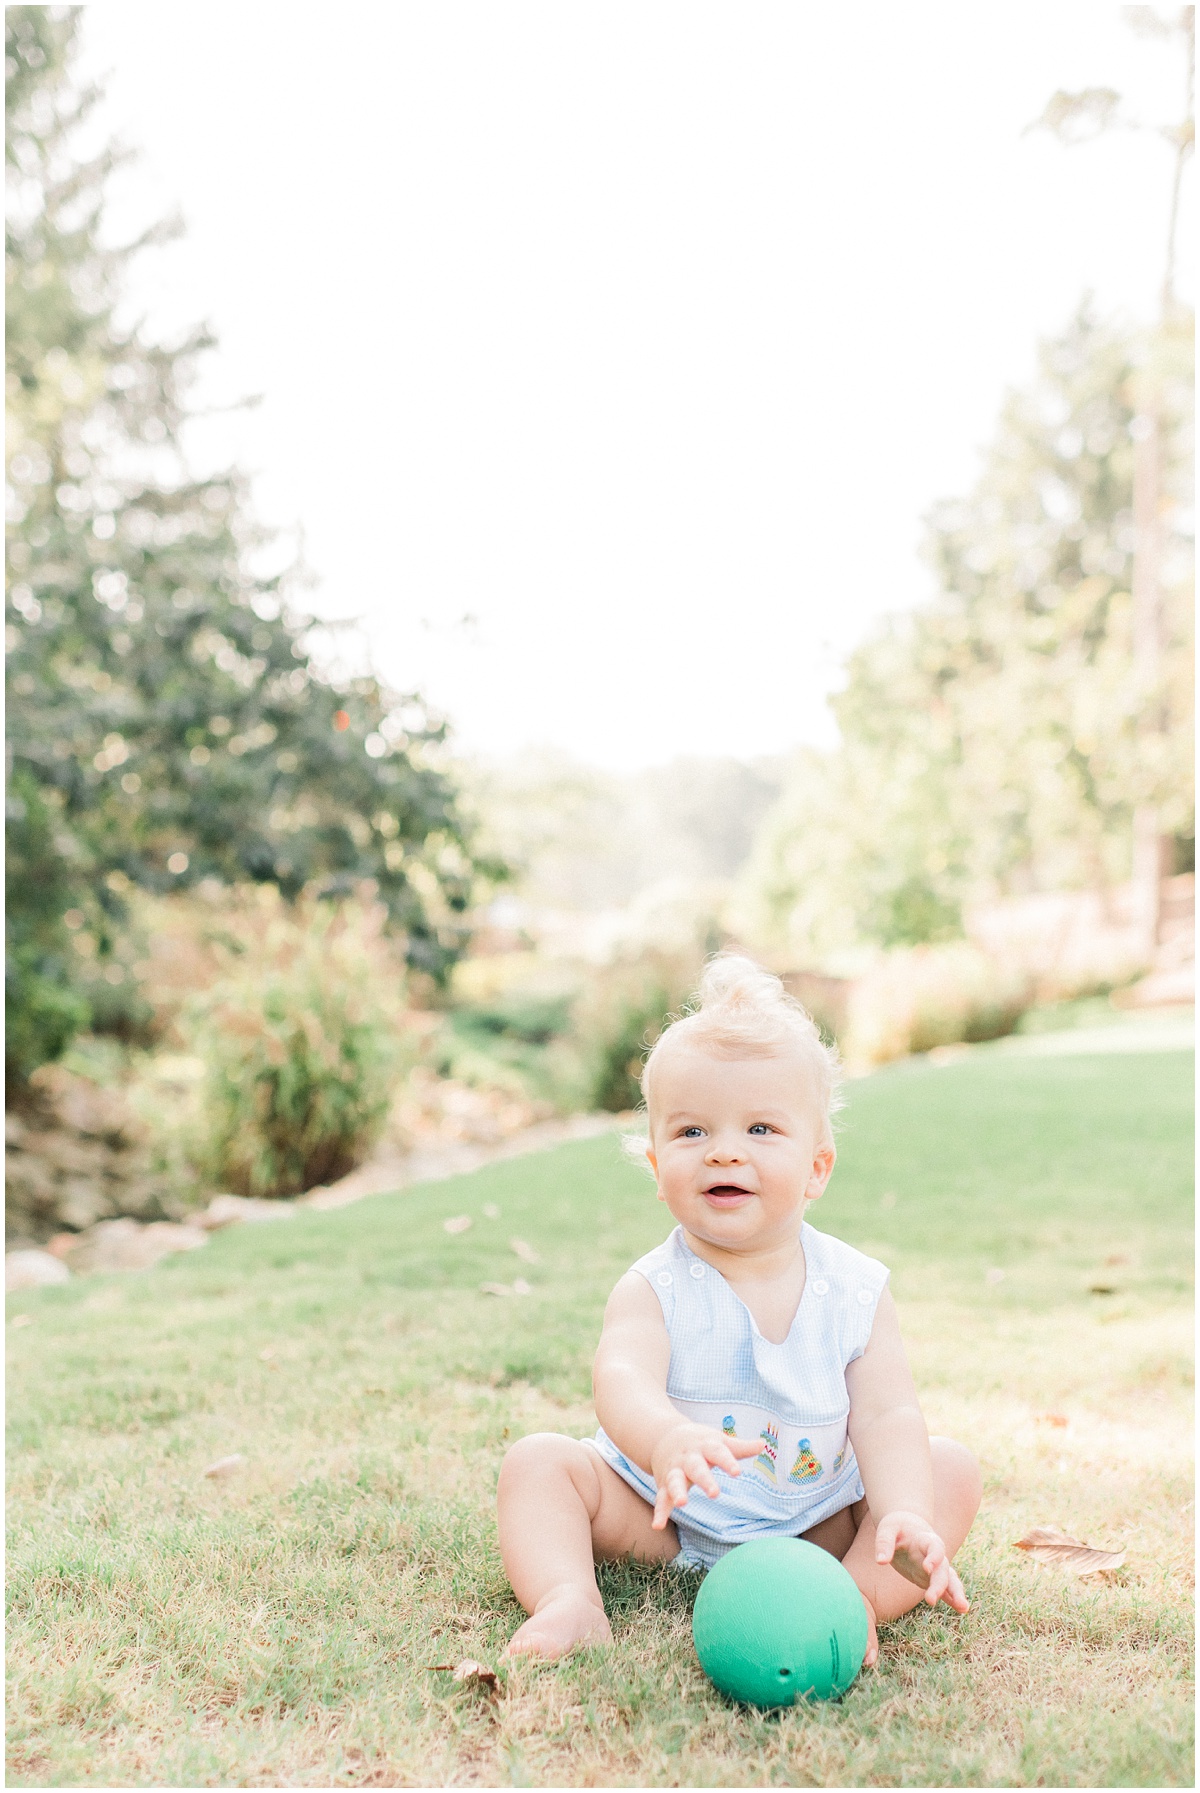 One Year Milestone Session | Greenville, SC